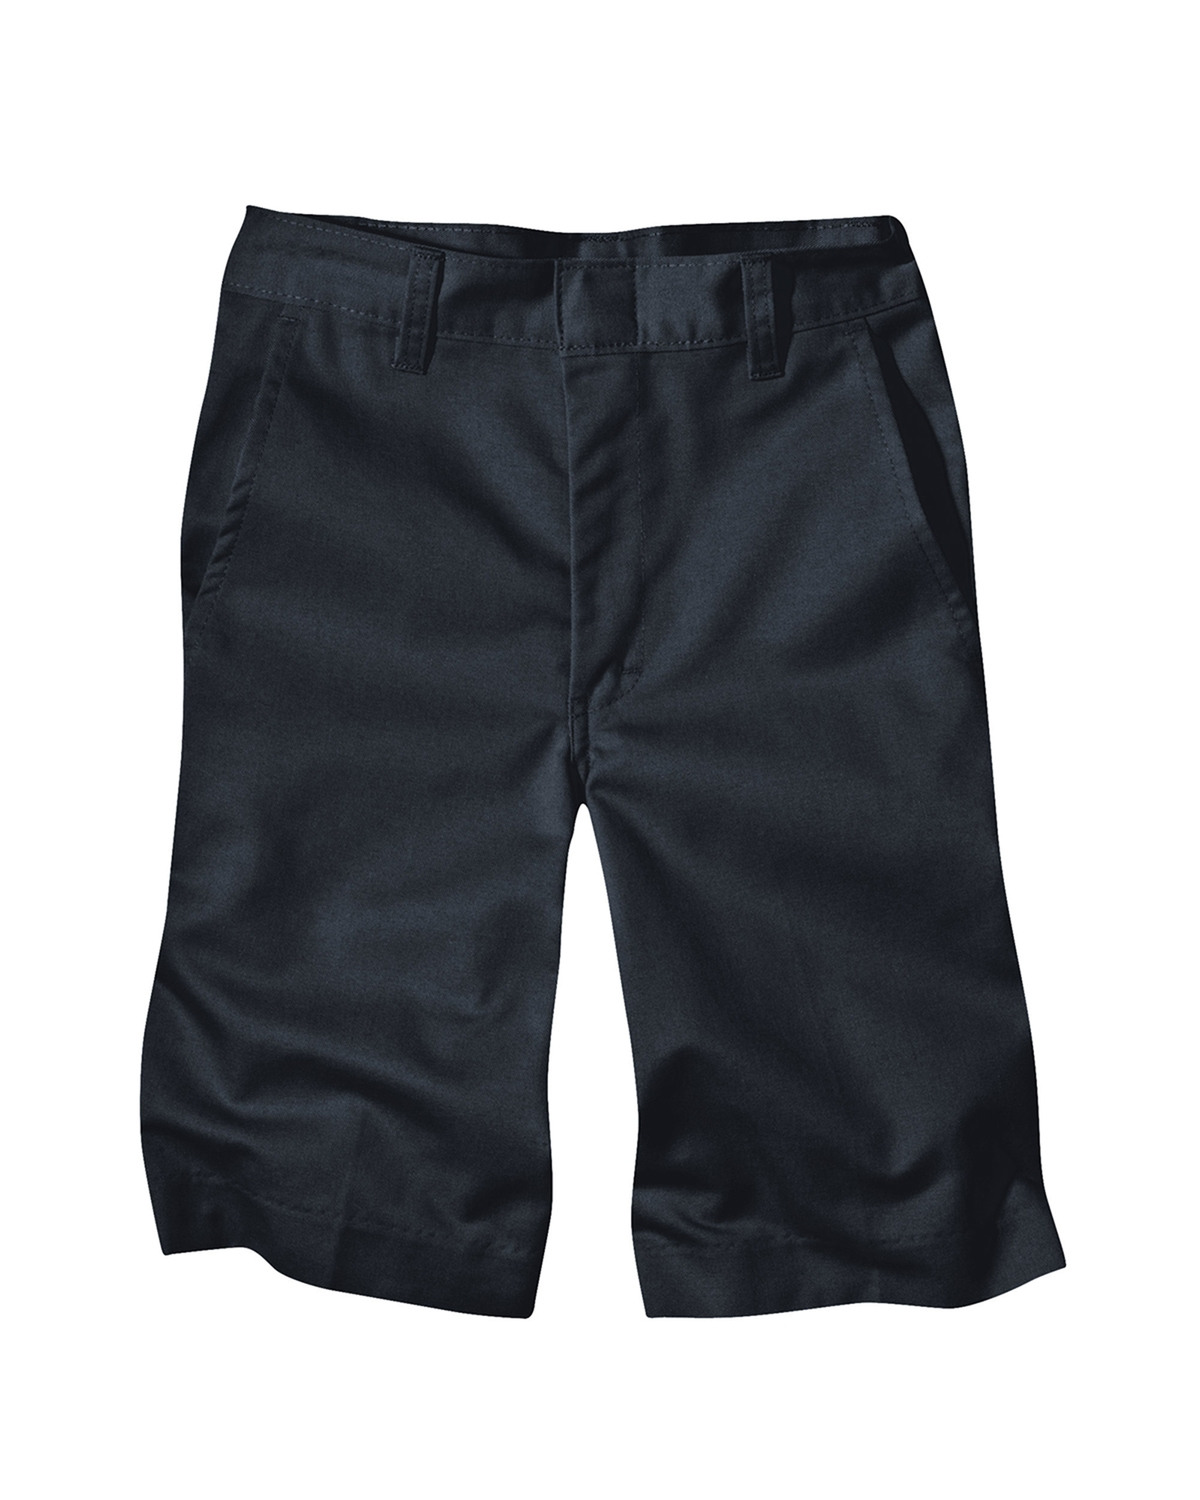 Dickies Style 54562 7.75 oz. Boy's Flat Front Short